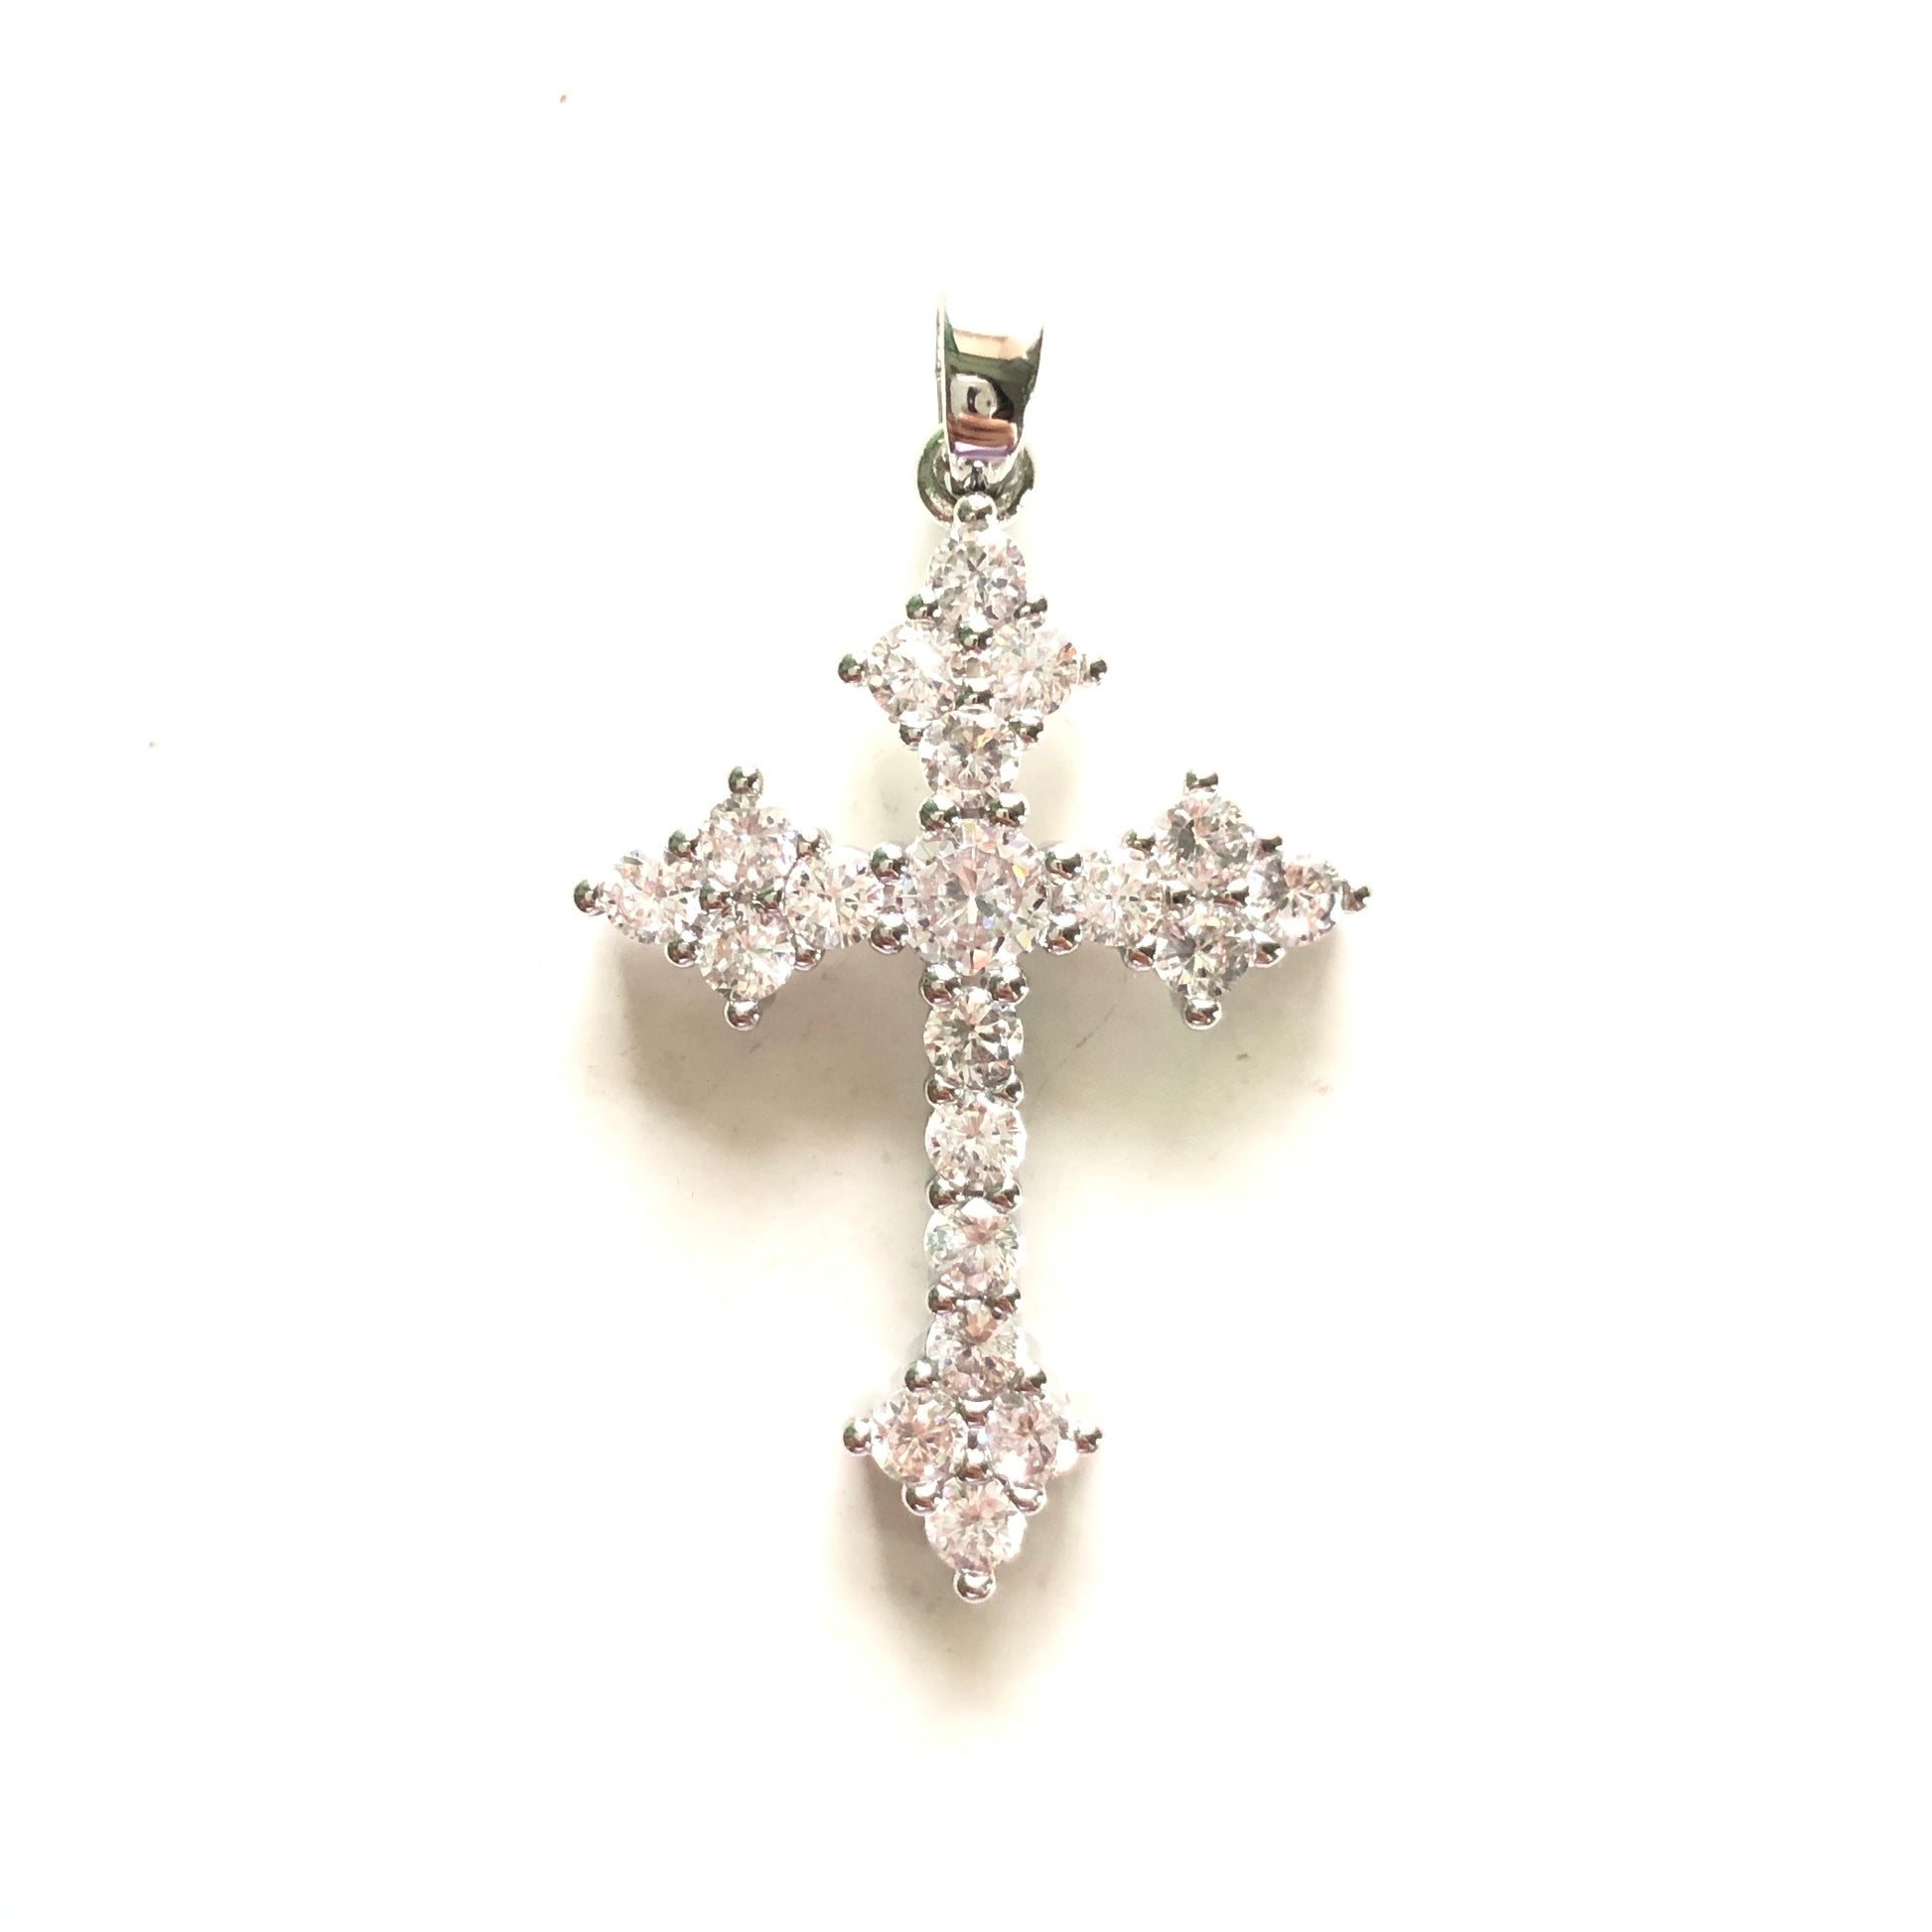 10pcs/lot 35*21mm CZ Paved Cross Charms Silver CZ Paved Charms Crosses Charms Beads Beyond